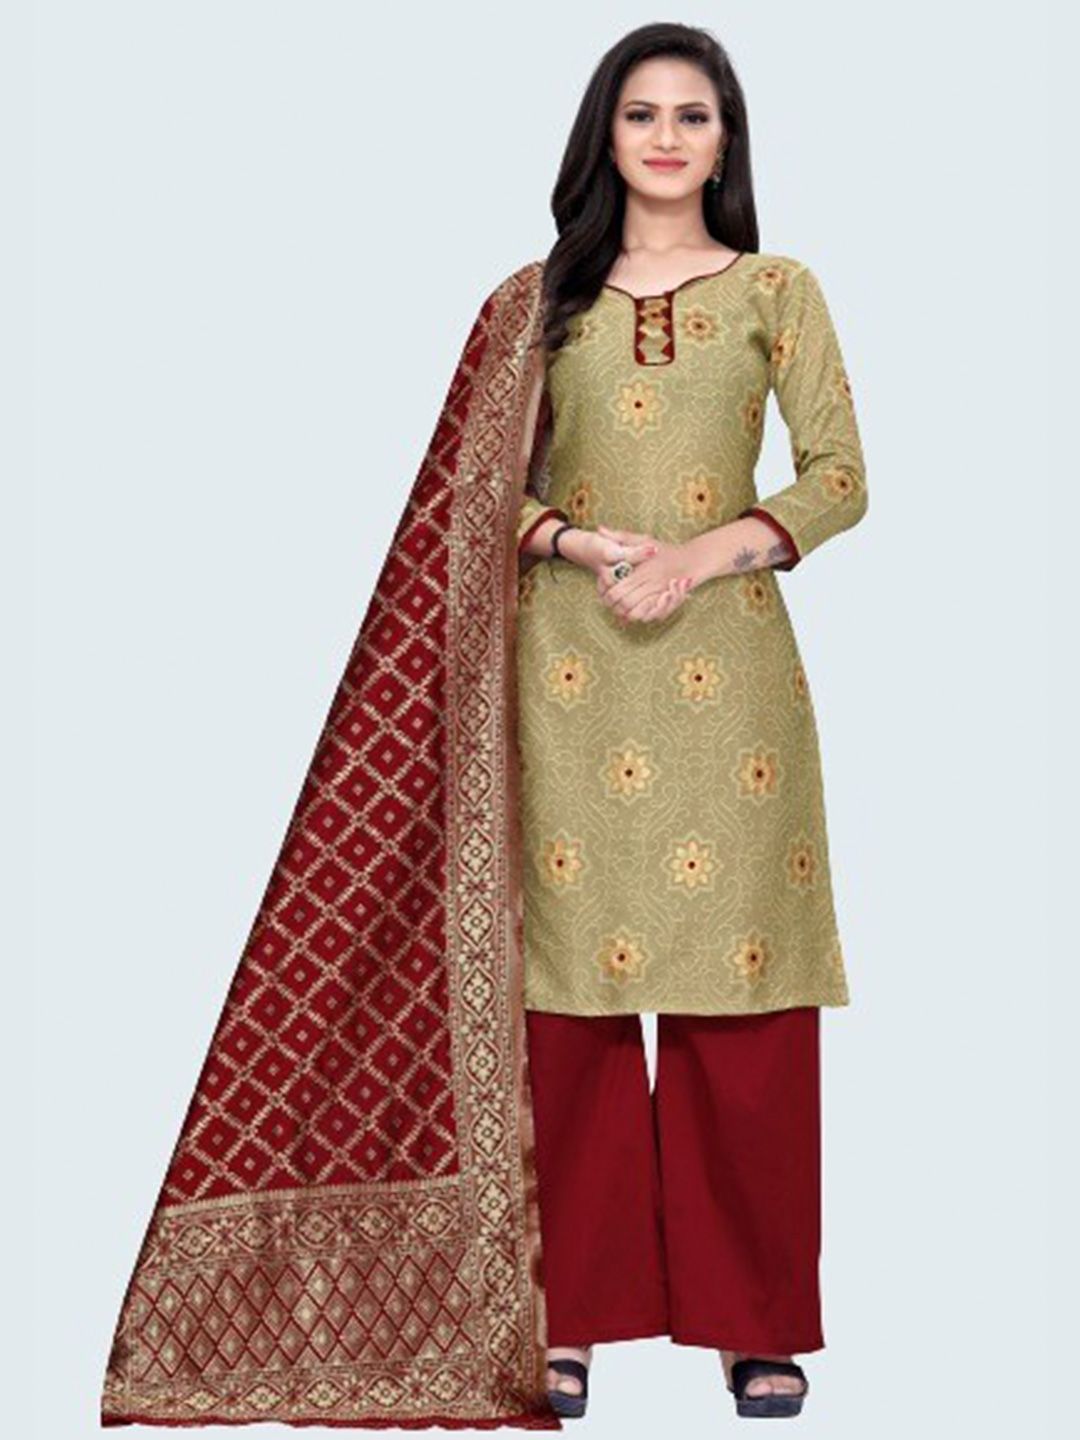 MORLY Beige & Gold-Toned Woven Design Dupion Silk Unstitched Dress Material Price in India